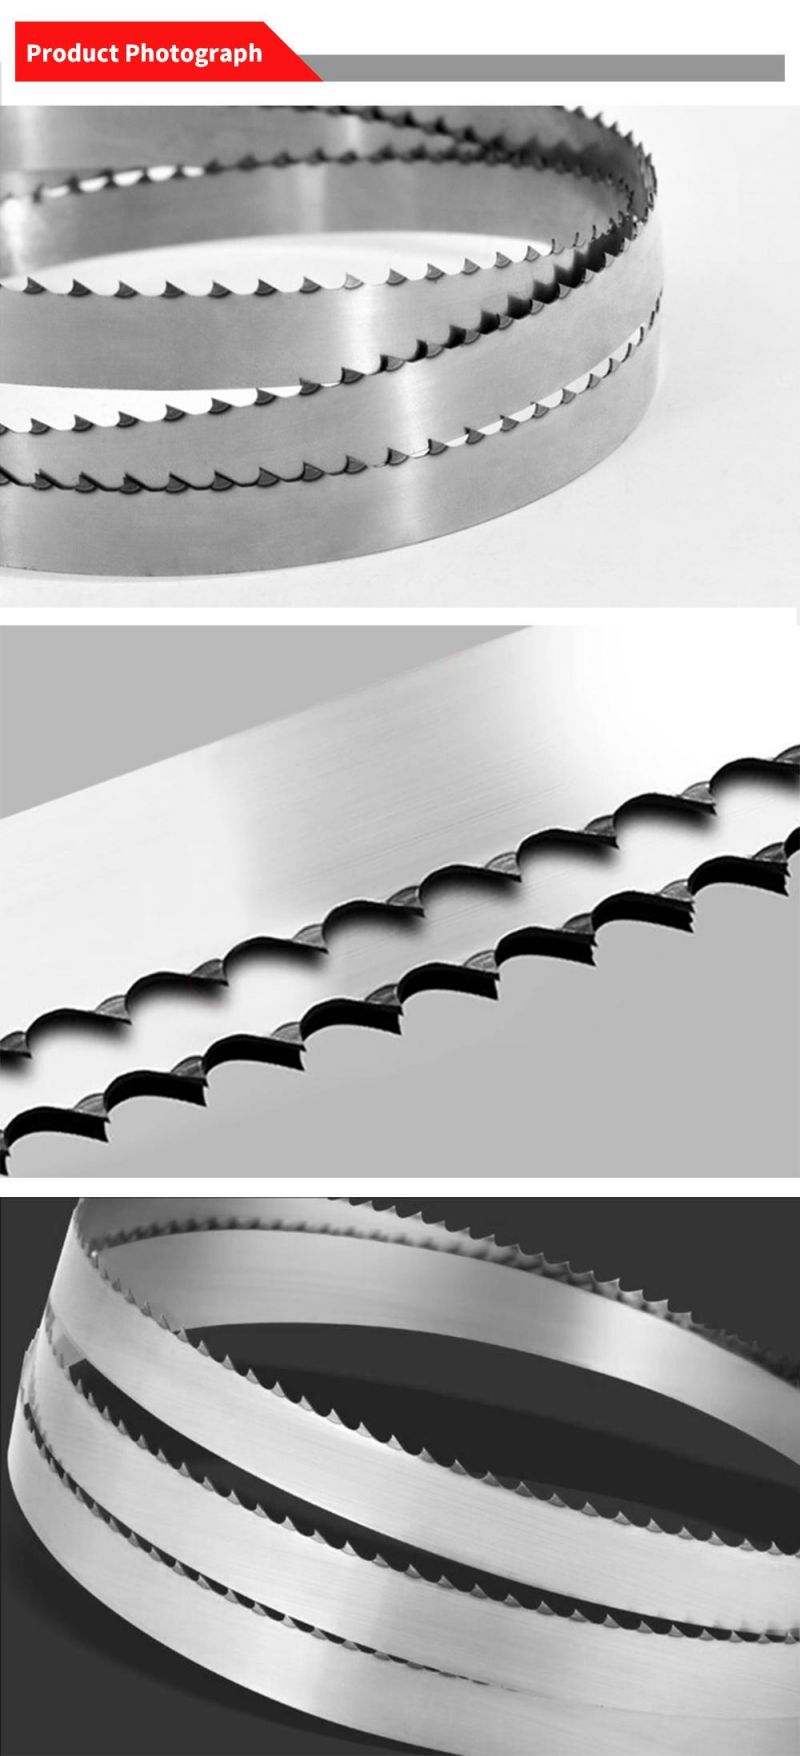 Band Saw Blade for Cutting Frozen Fish Meat Bones